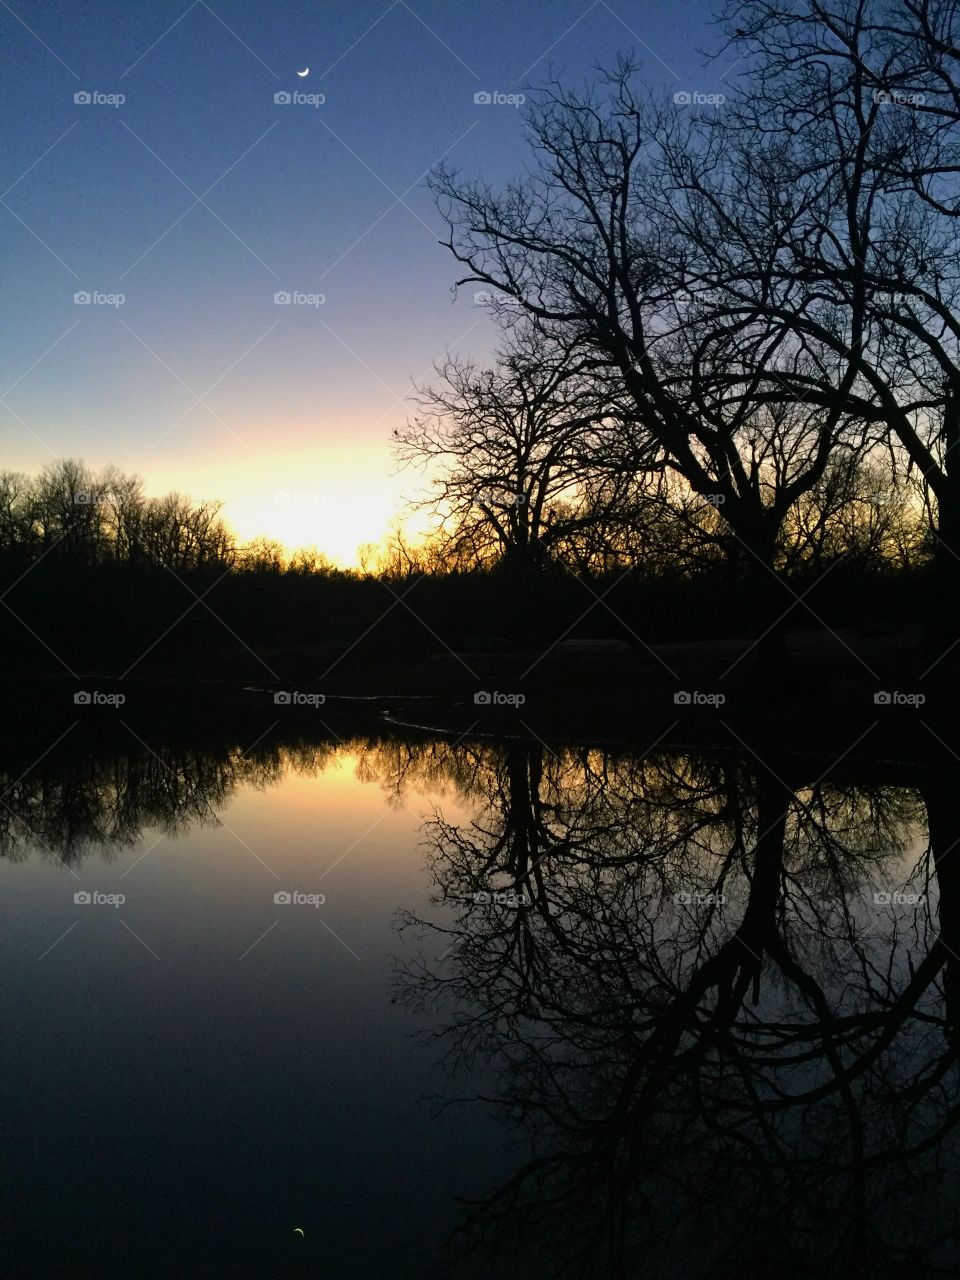 Crescent moon reflecting on a farm pond just after the winter sunset.